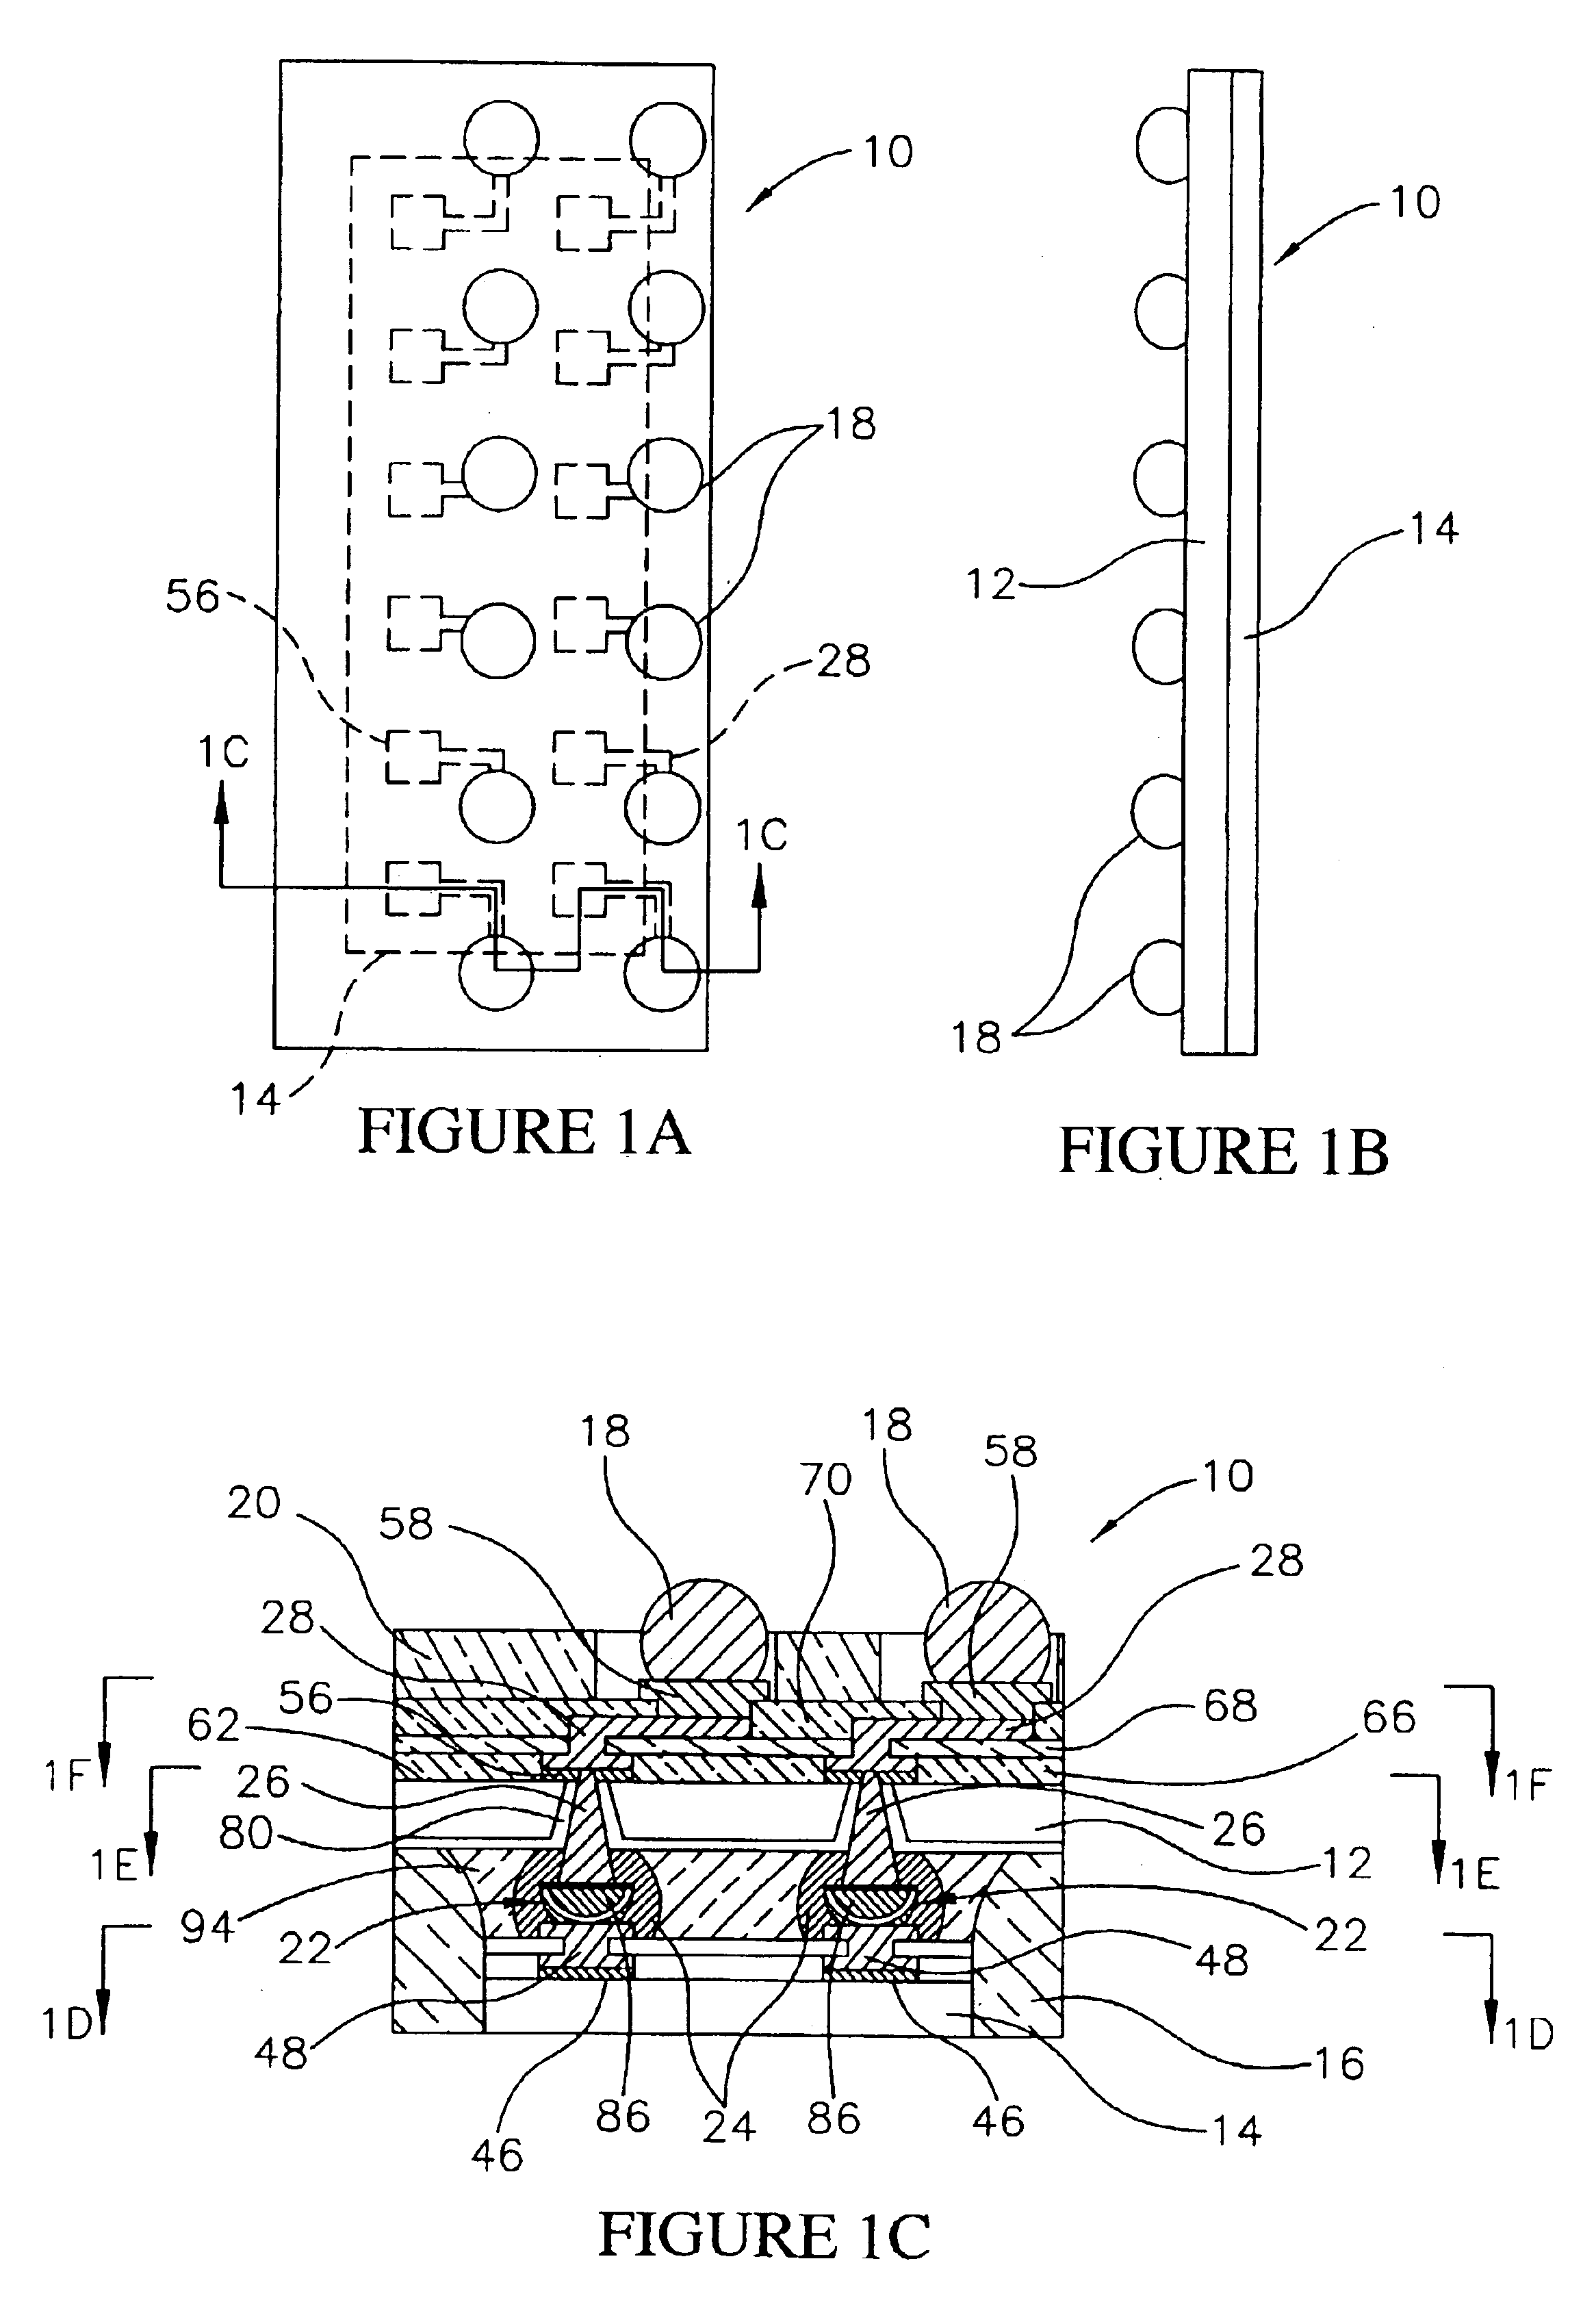 Multi-dice chip scale semiconductor components and wafer level methods of fabrication